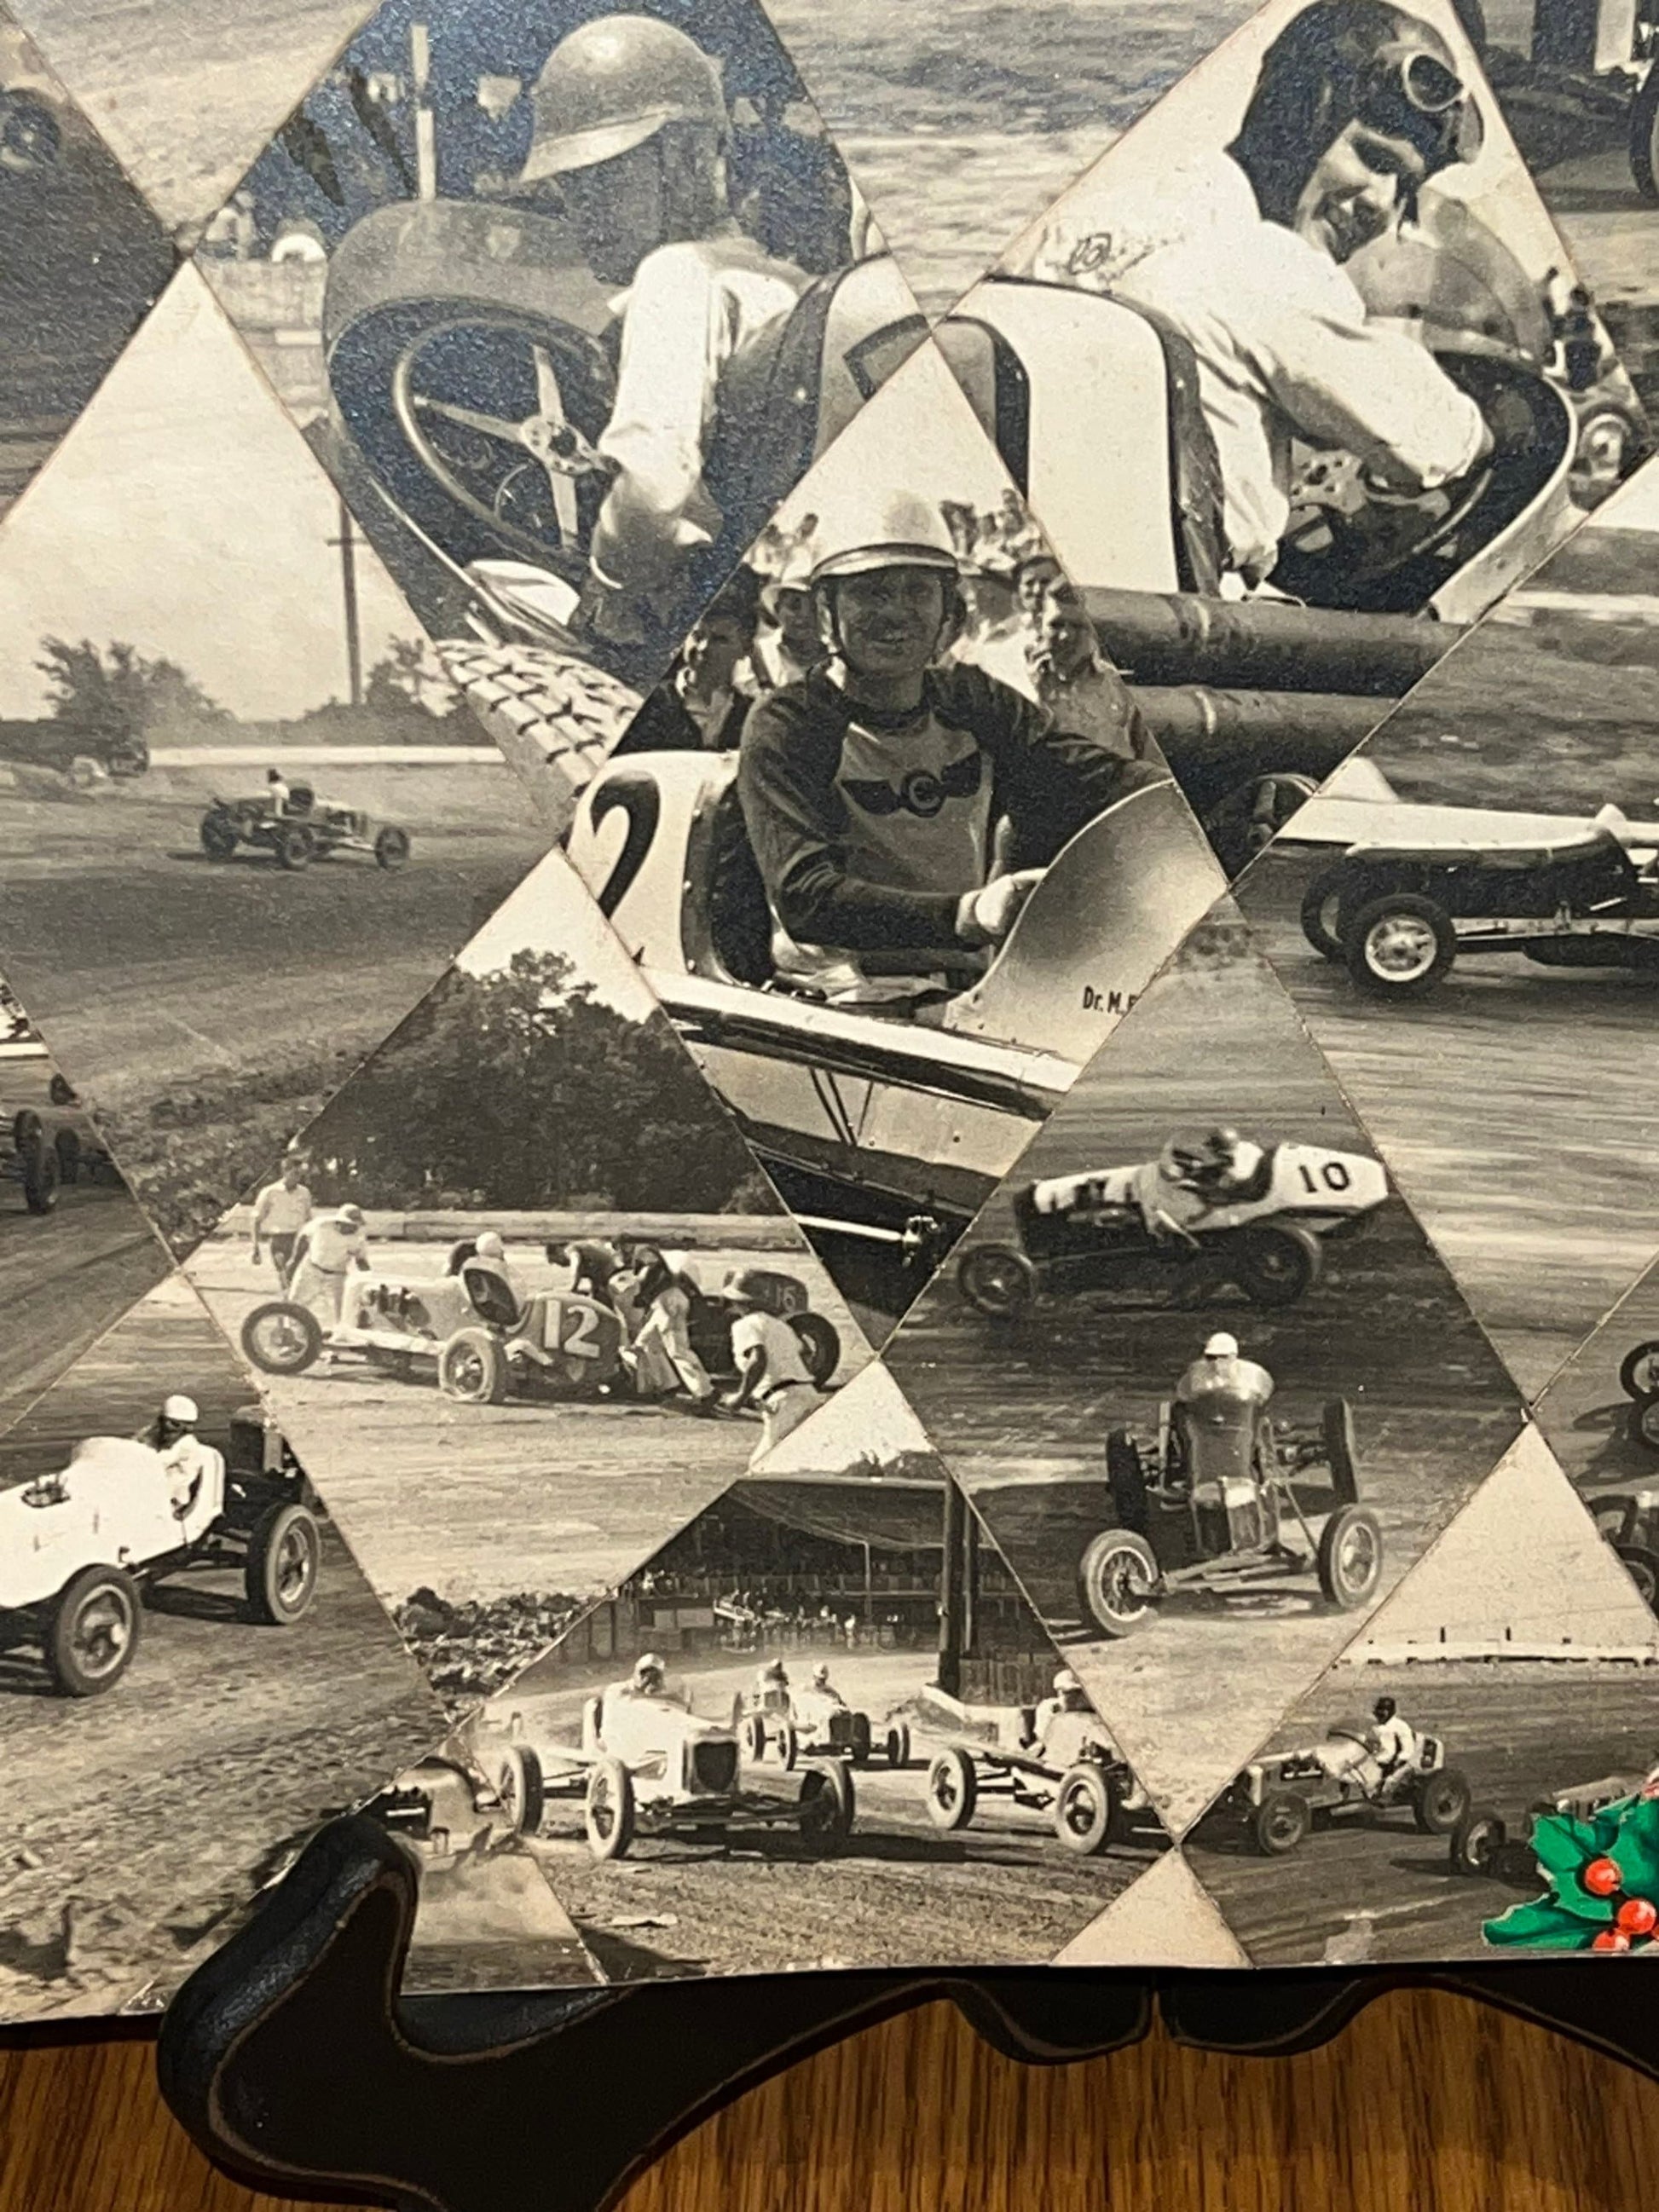 Antique racing photo early automobiles race car mounted photo 1920s collage